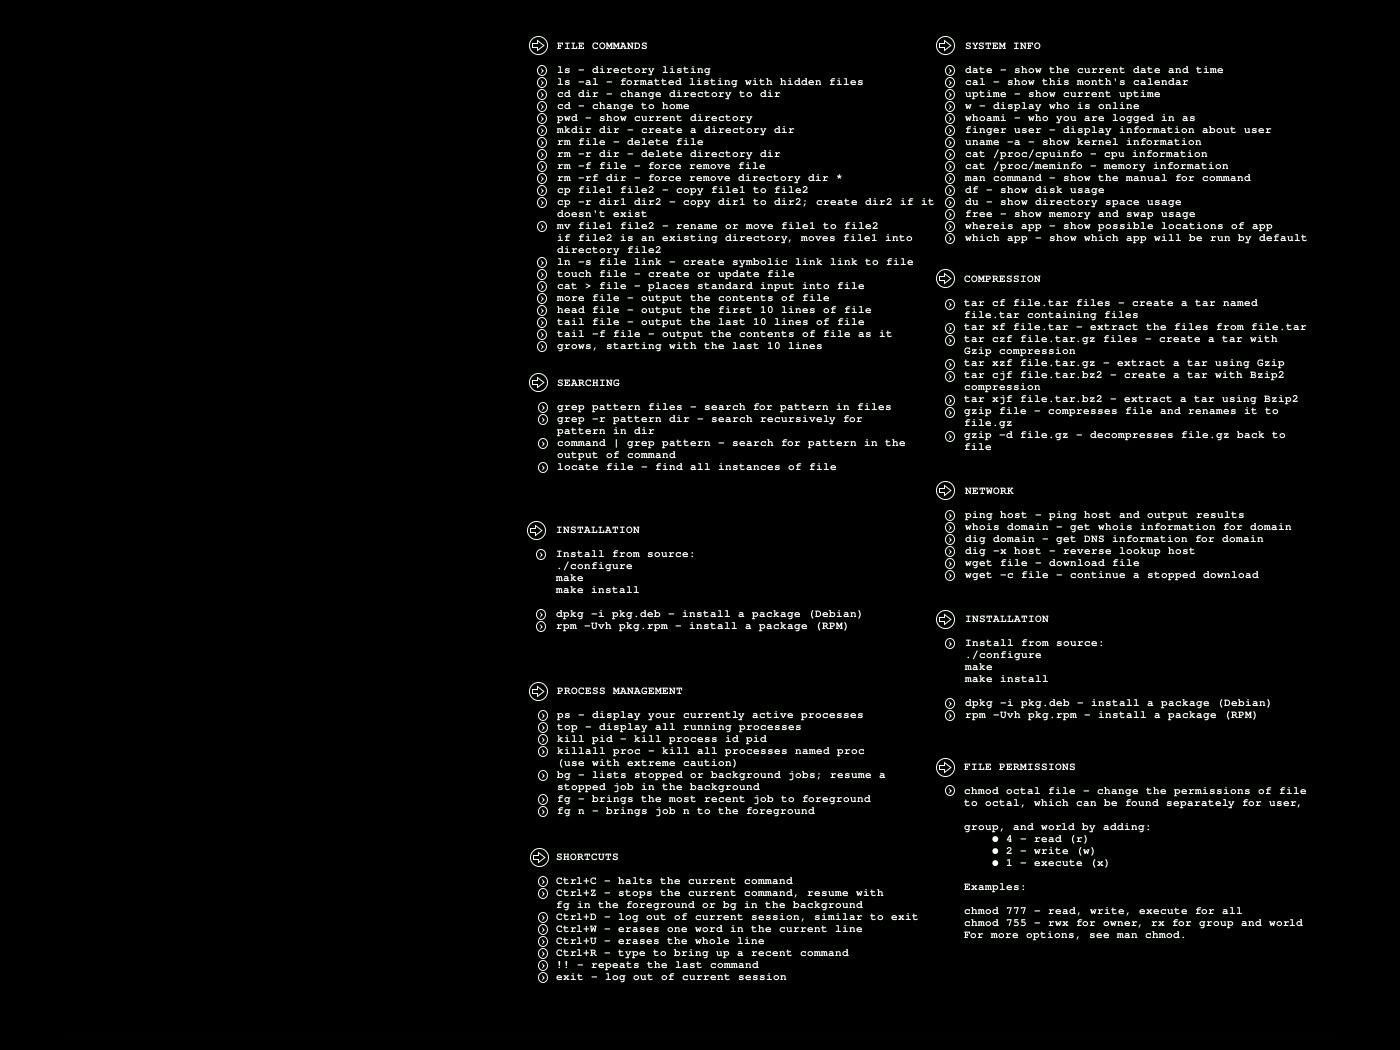 Linux command cheat sheet / 1400x1050 Wallpaper. Cat treat recipes, Linux, Snickerdoodle cookie recipes